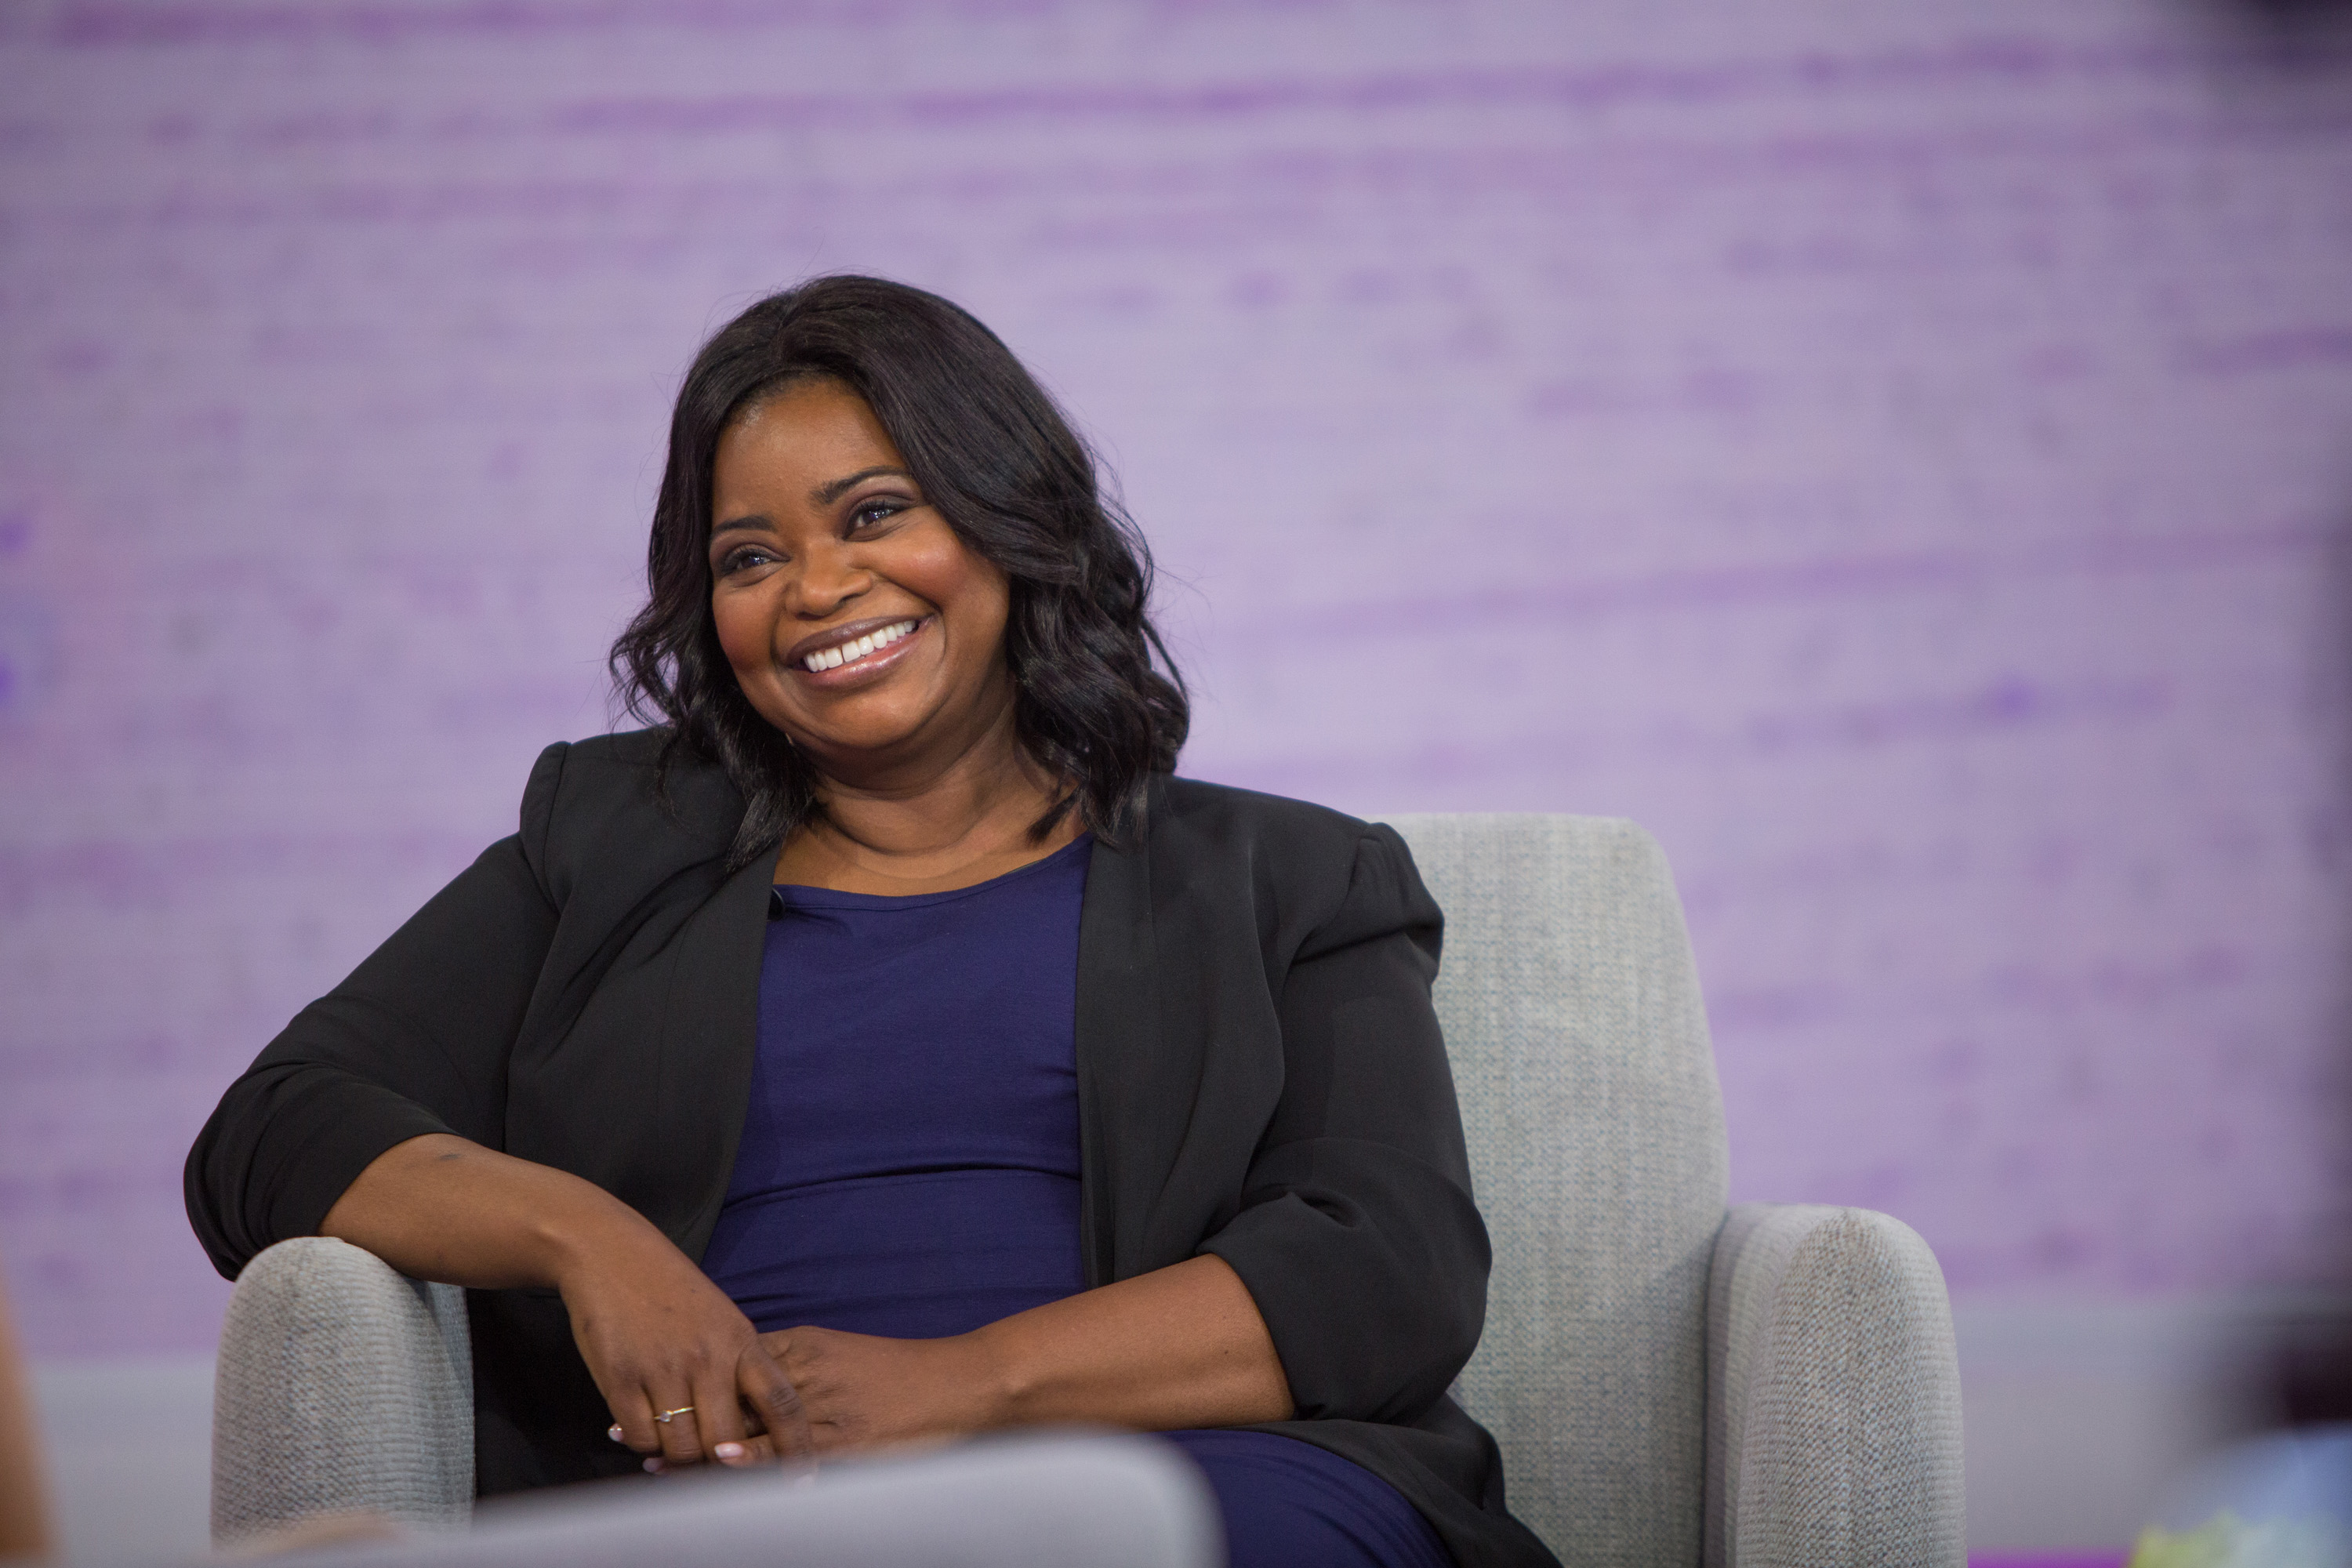 Octavia Spencer on Monday, May 21, 2018 (NBC—NBCU Photo Bank via Getty Images)